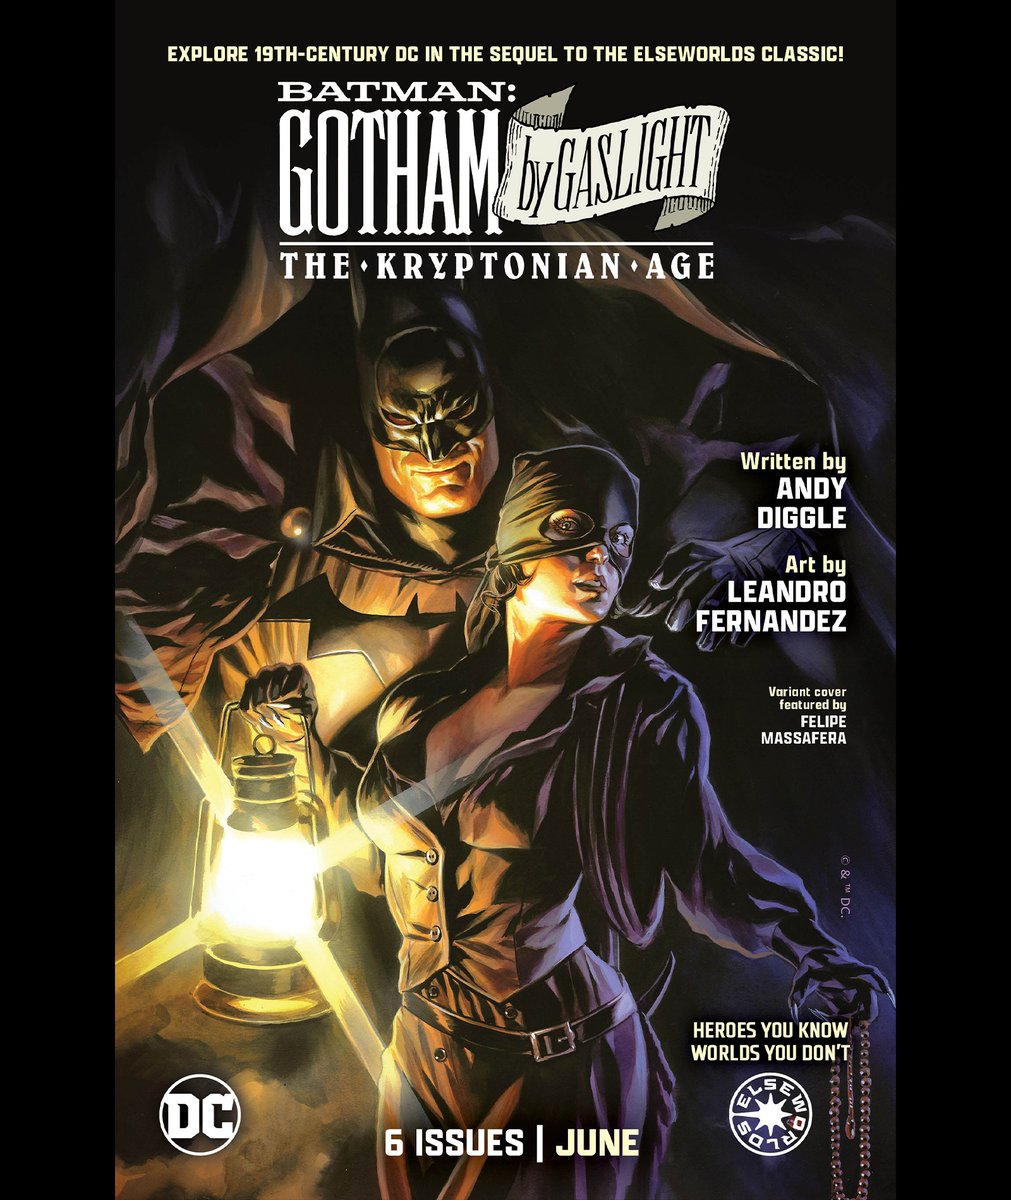 Witness the origin of the 19th Century #JLA in #BATMAN Gotham By Gaslight: The Kryptonian Age — the official sequel to the Elseworlds classic! Final Order Cut-Off for issue #1 is this Sunday, May 19! On sale June 11!